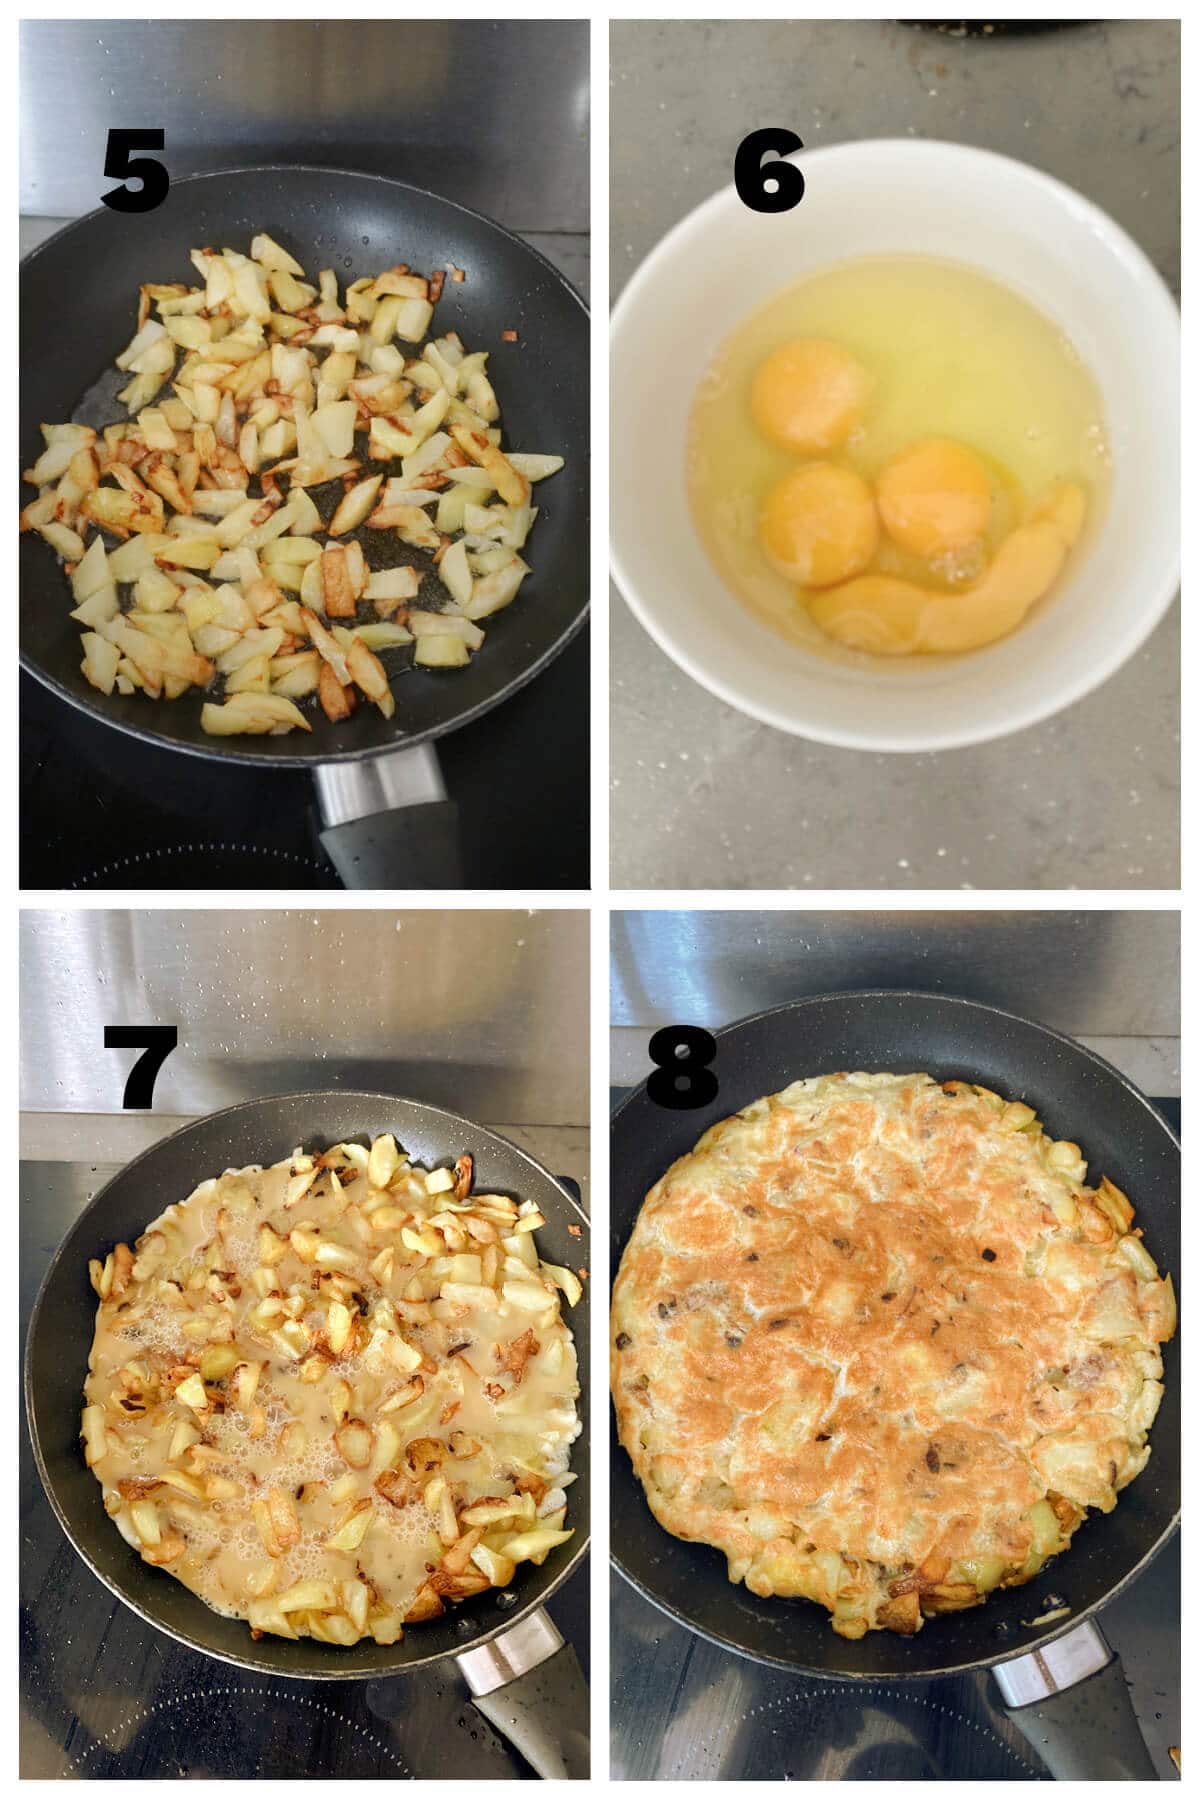 Collage of 4 photos to show how to make potato omelette